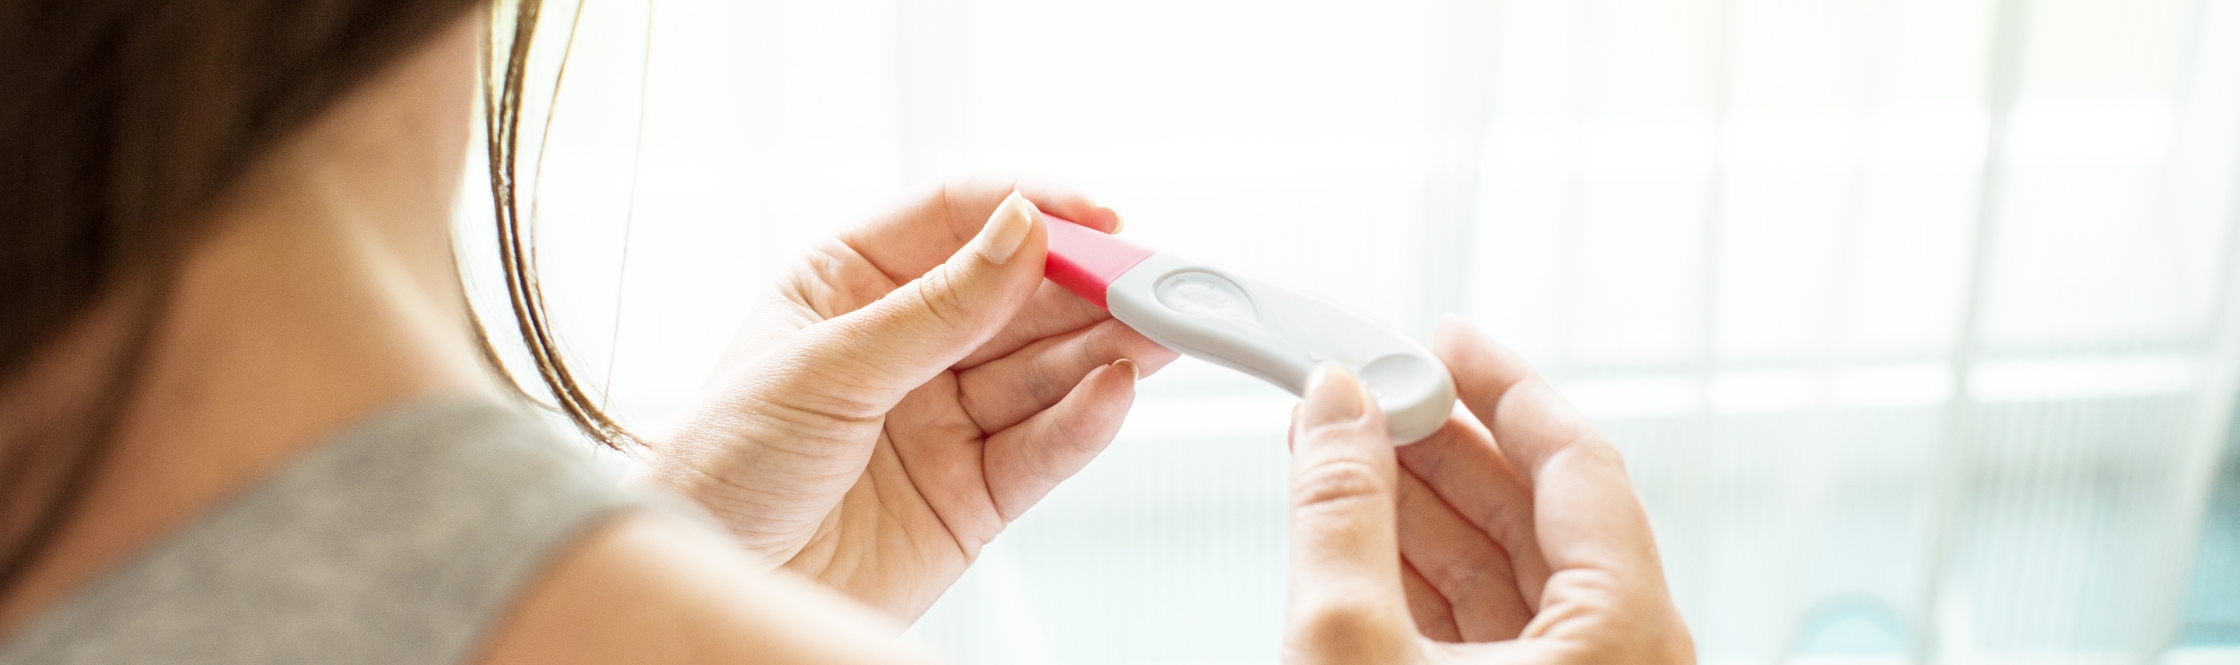 Can You Trust At-home Pregnancy Tests